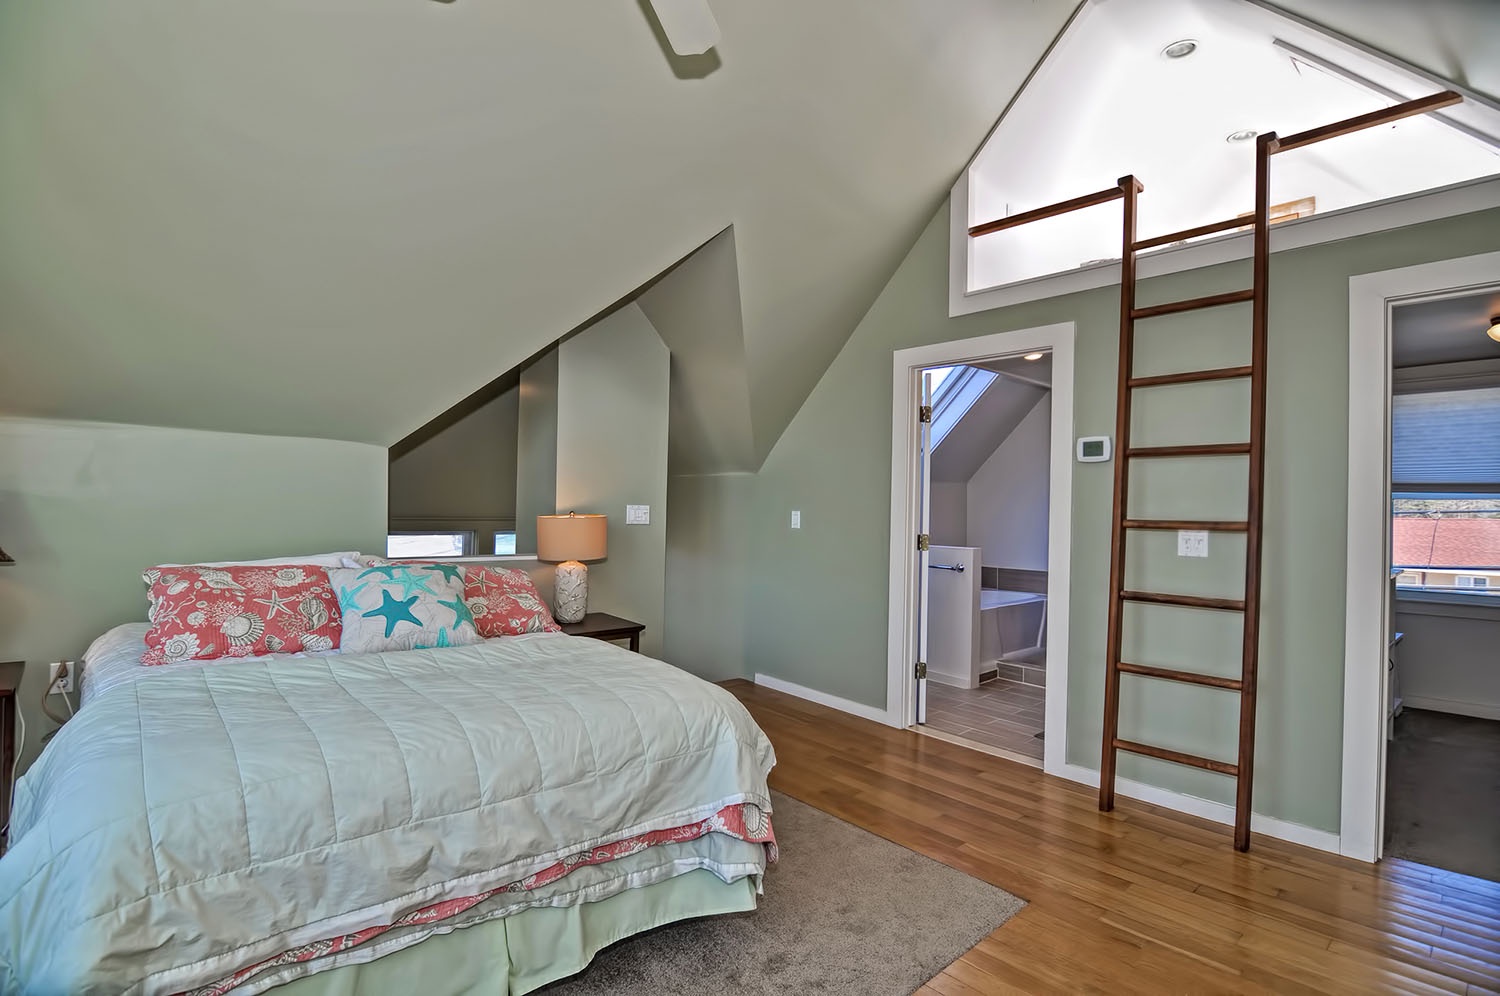 The upper Master suite has a built-in loft.